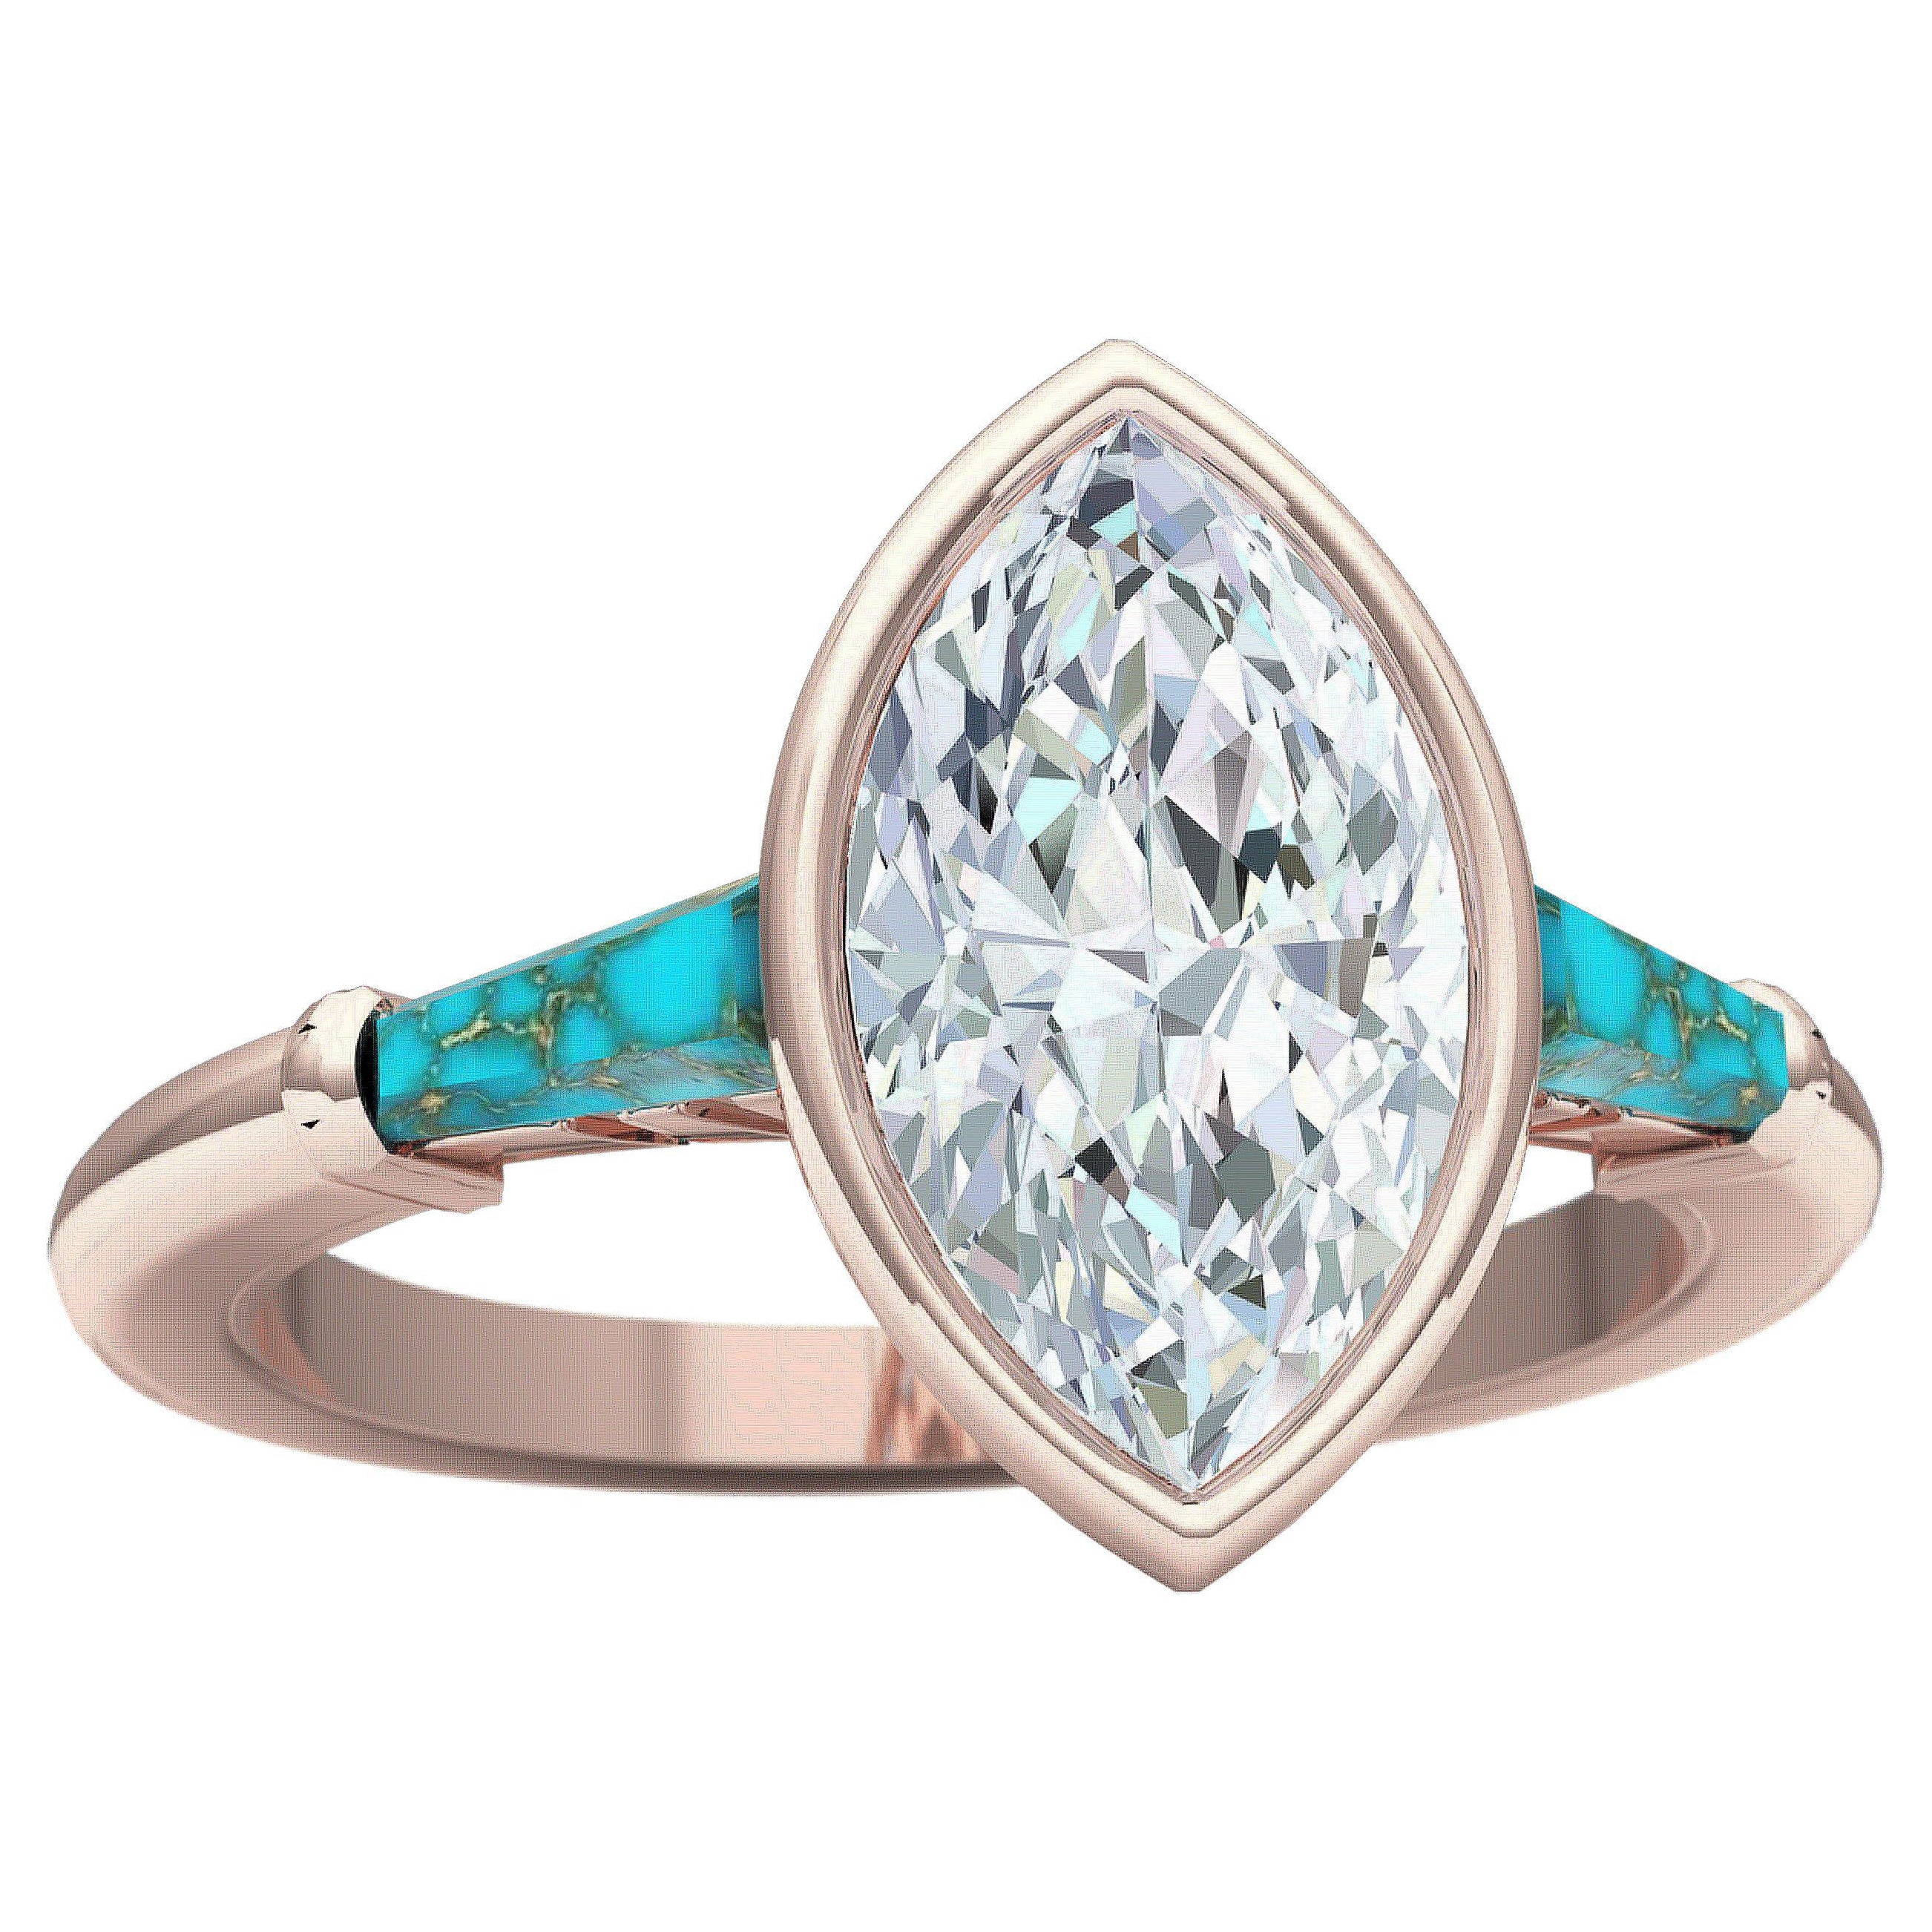 1.4 Carat Marquise Diamond and Turquoise Rose Gold Engagement Ring